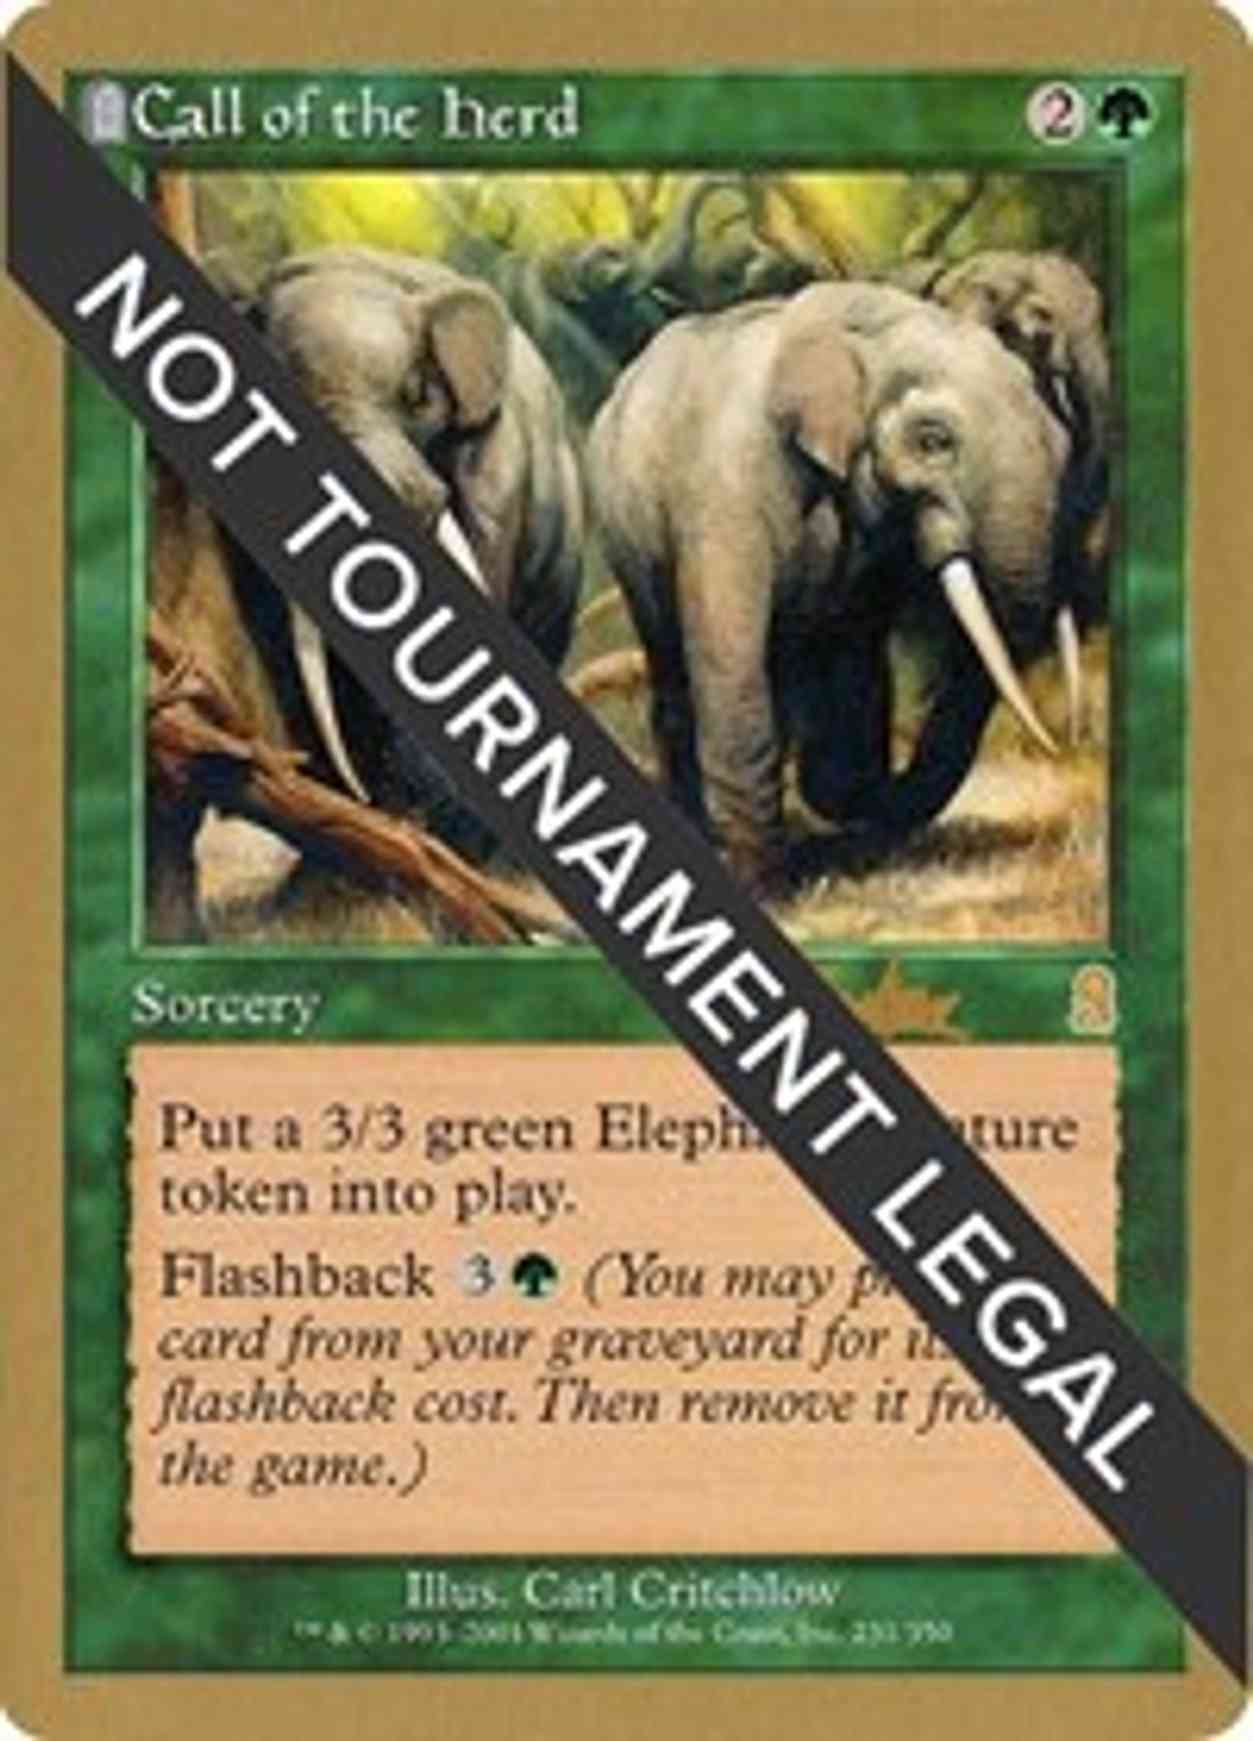 Call of the Herd - 2002 Brian Kibler (ODY) magic card front